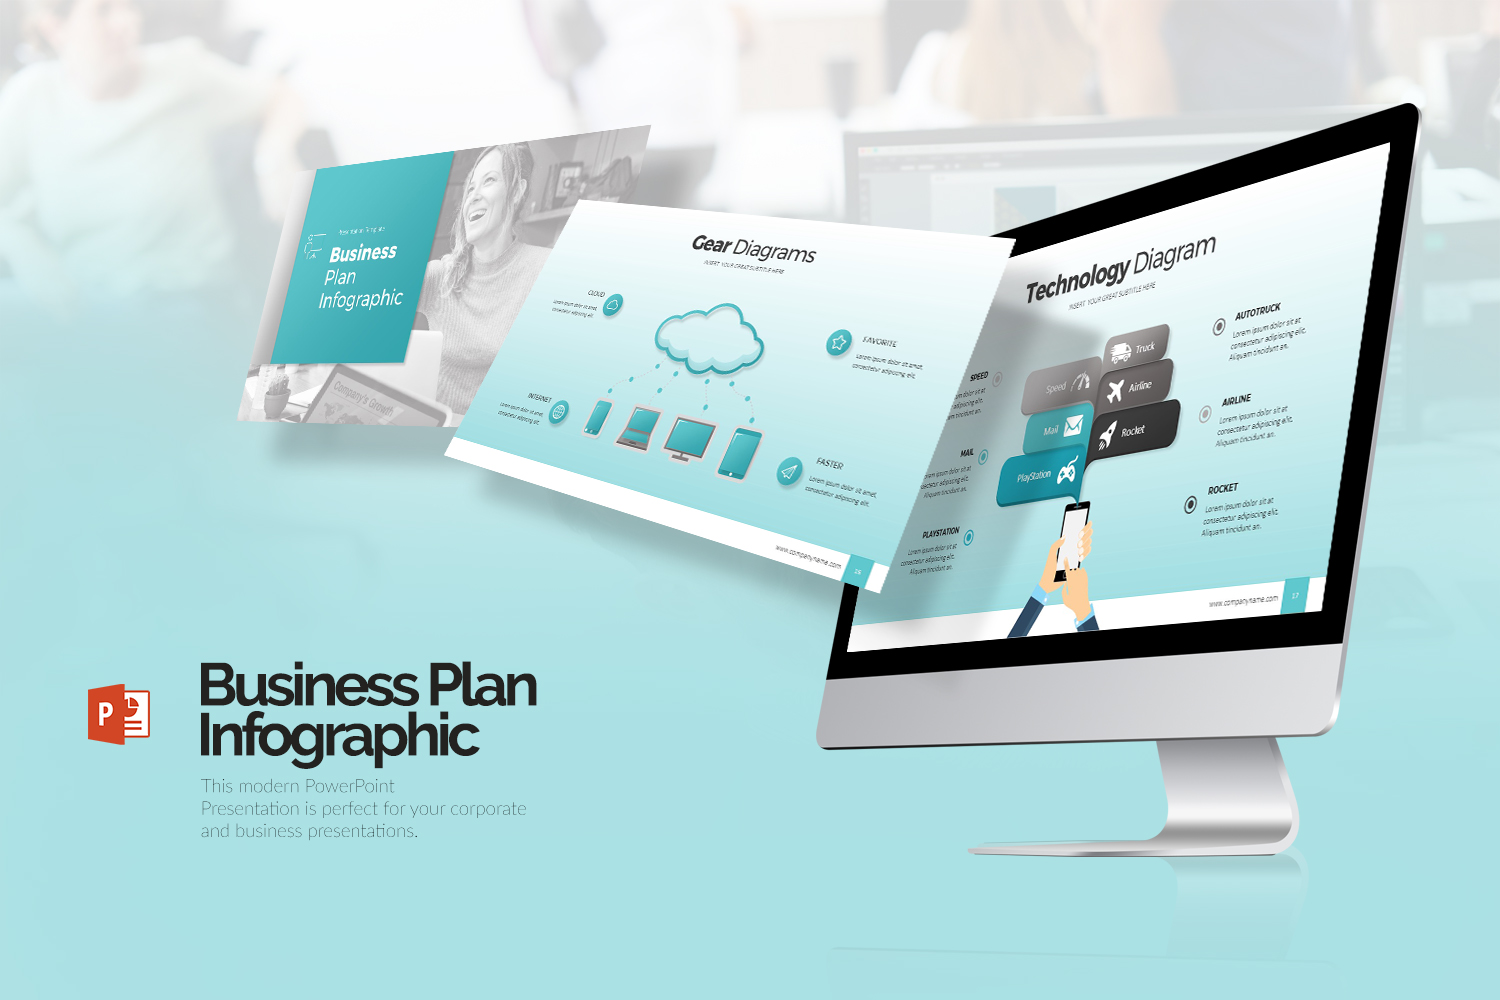 Business Plan Infographic PowerPoint template